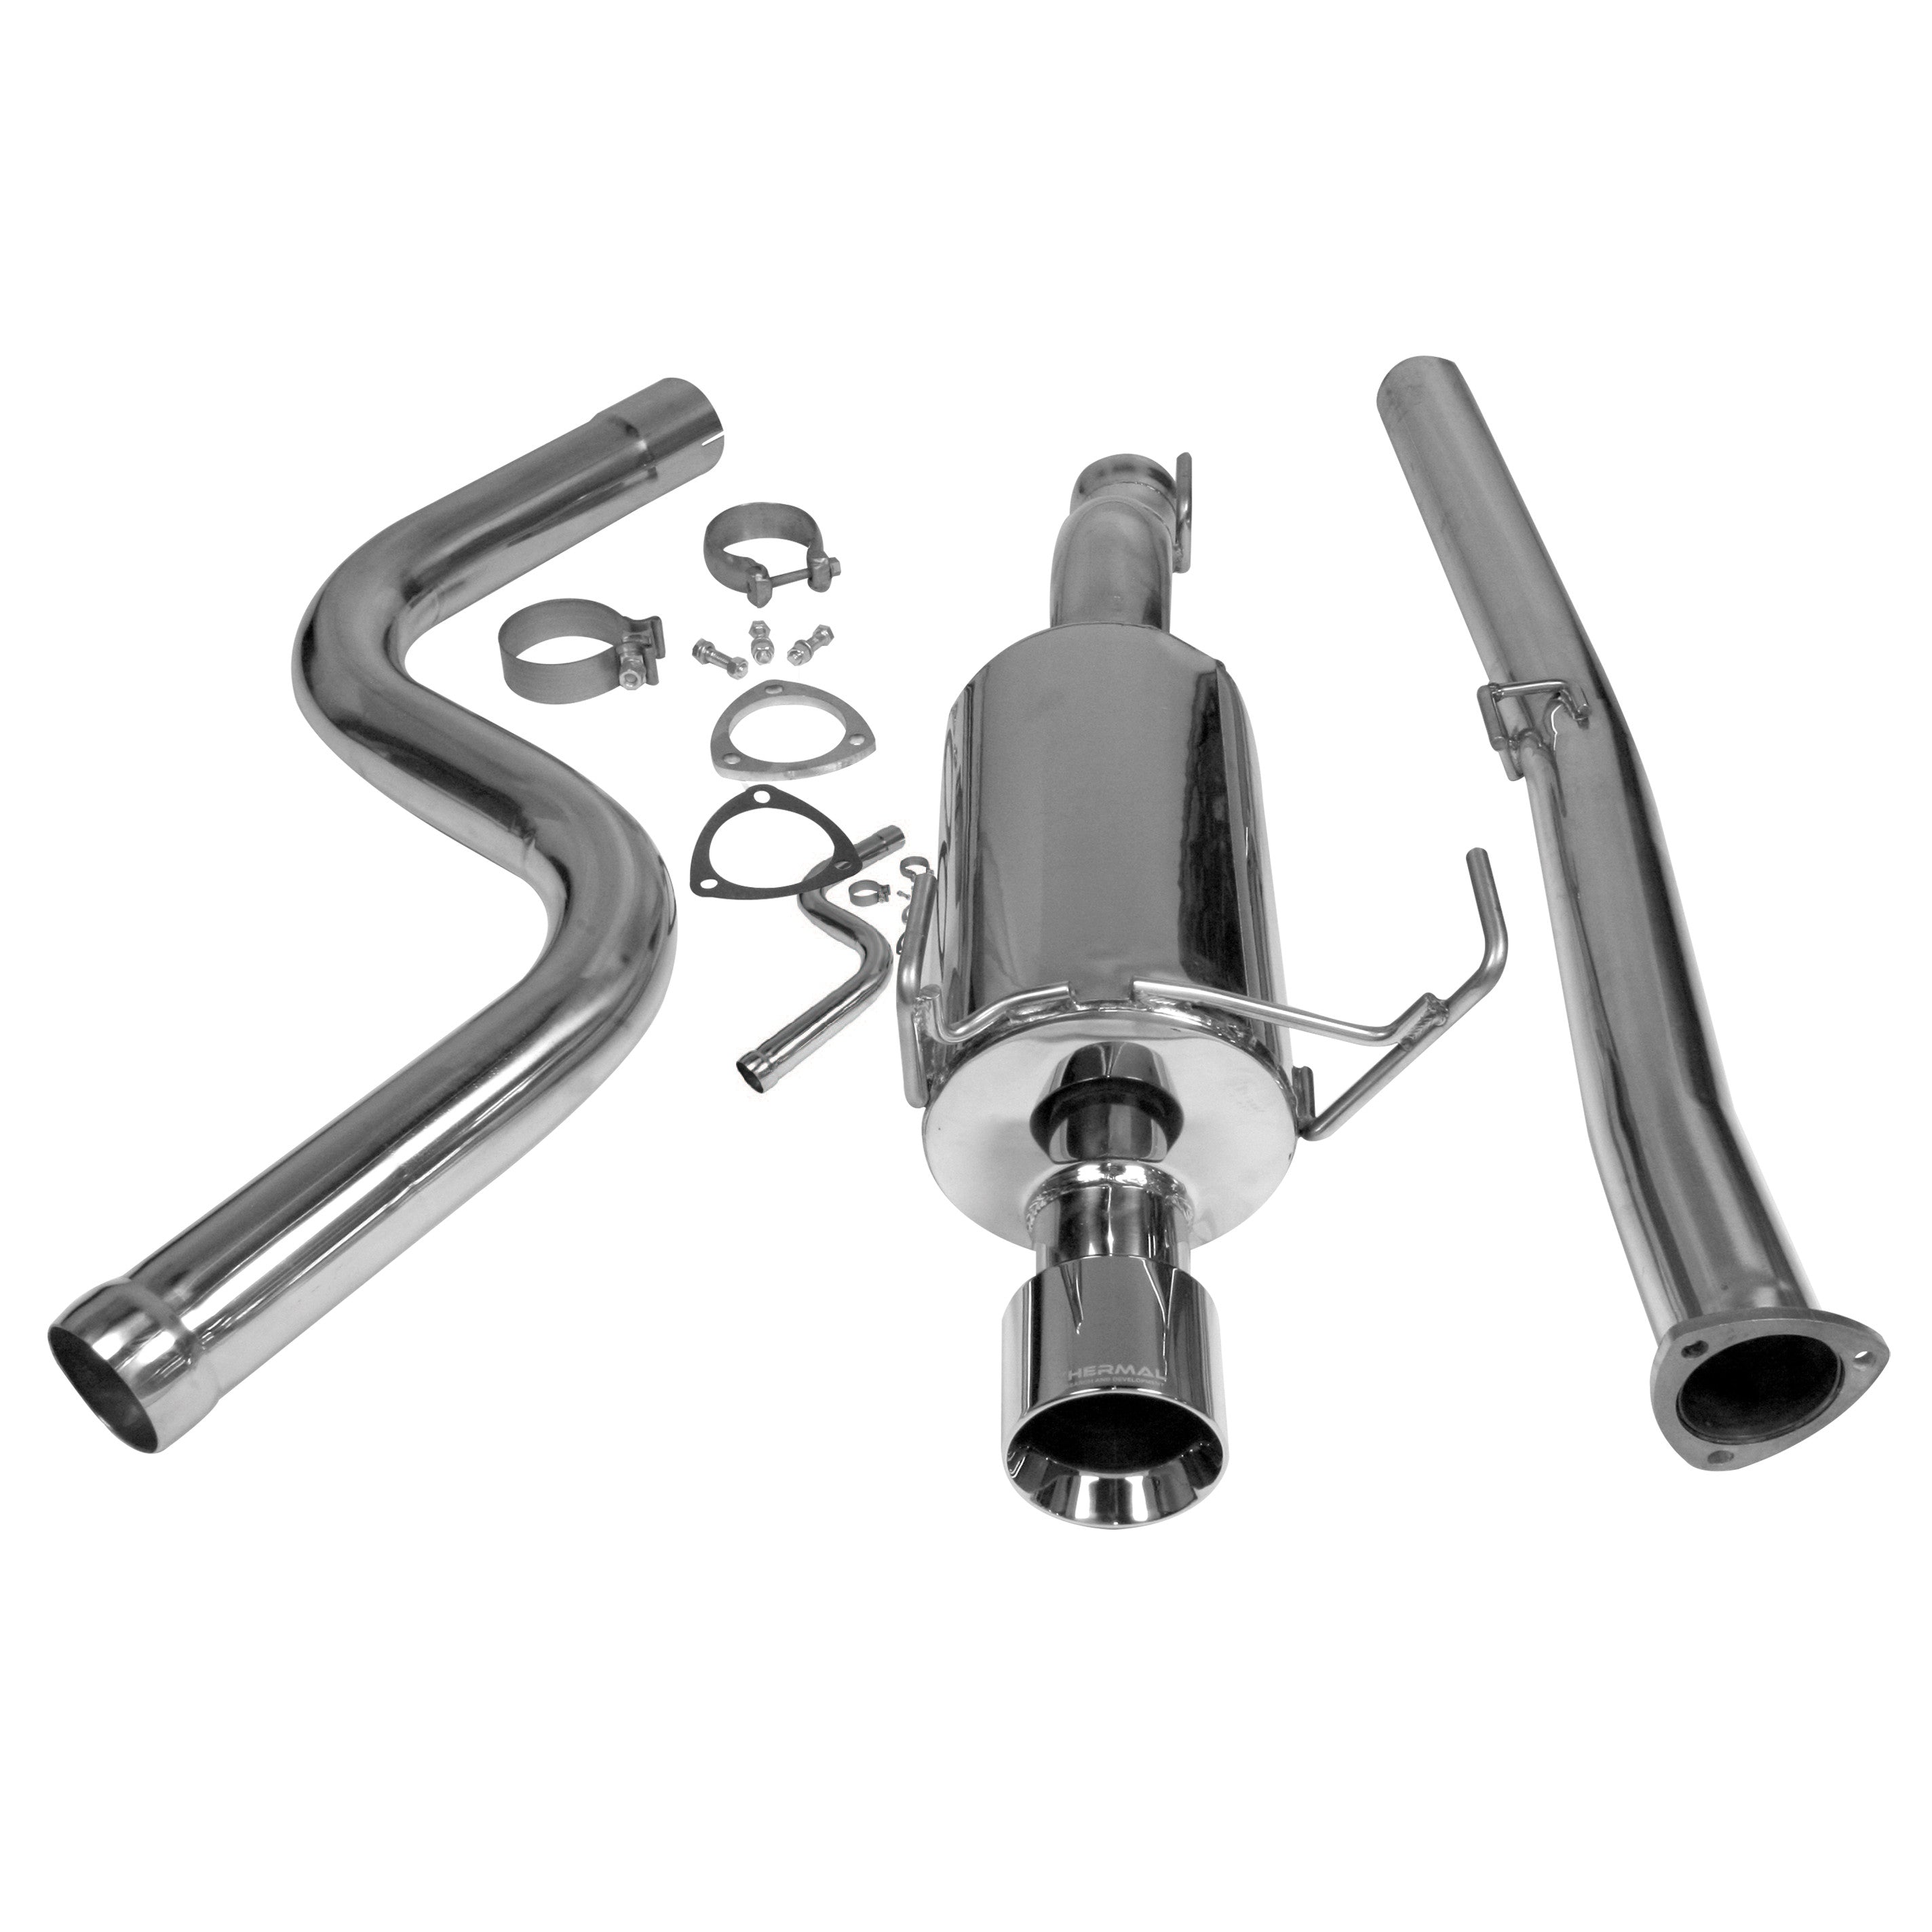 1996-2000 Honda Civic - 3" - 3 Door Hatch w/ Turbo - Catback Exhaust - New Orders Expected To Ship End Of January